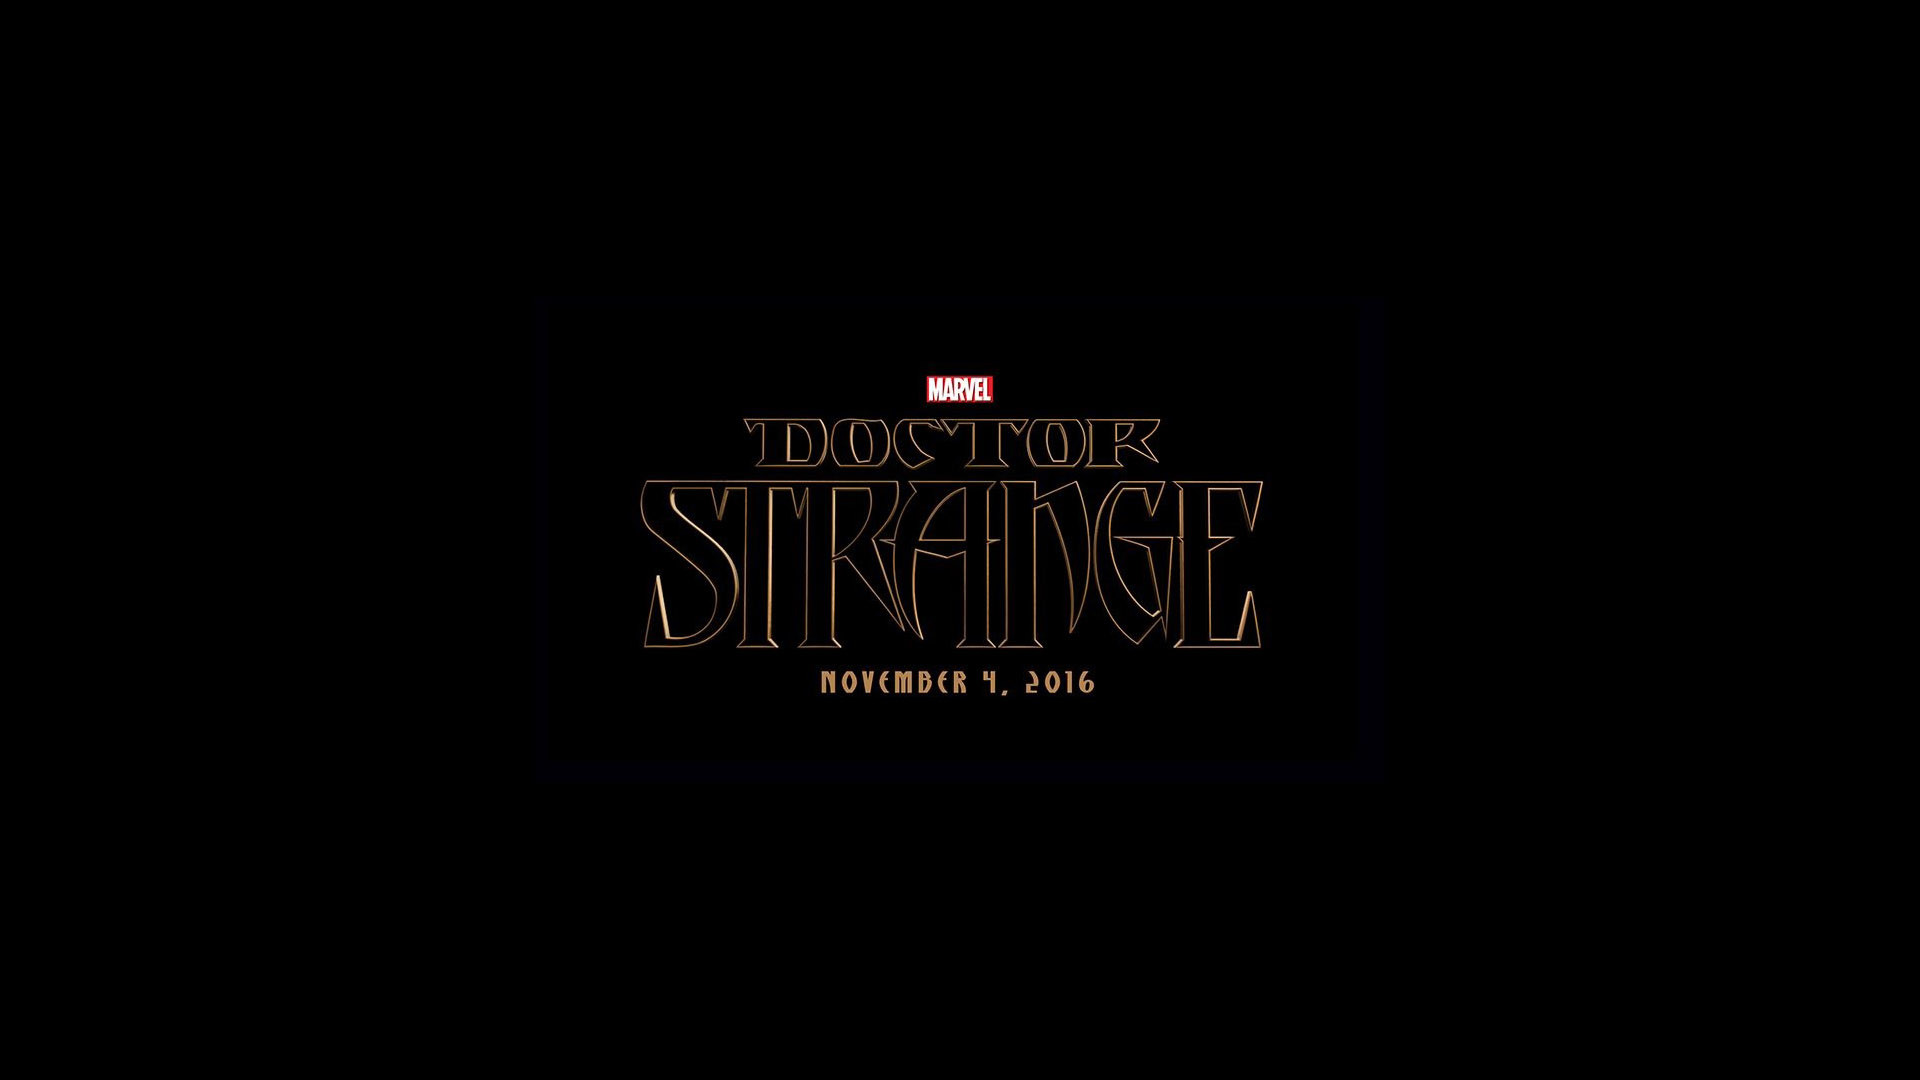 1920x1080 Given below are reaming HD Doctor Strange movie wallpapers for free: